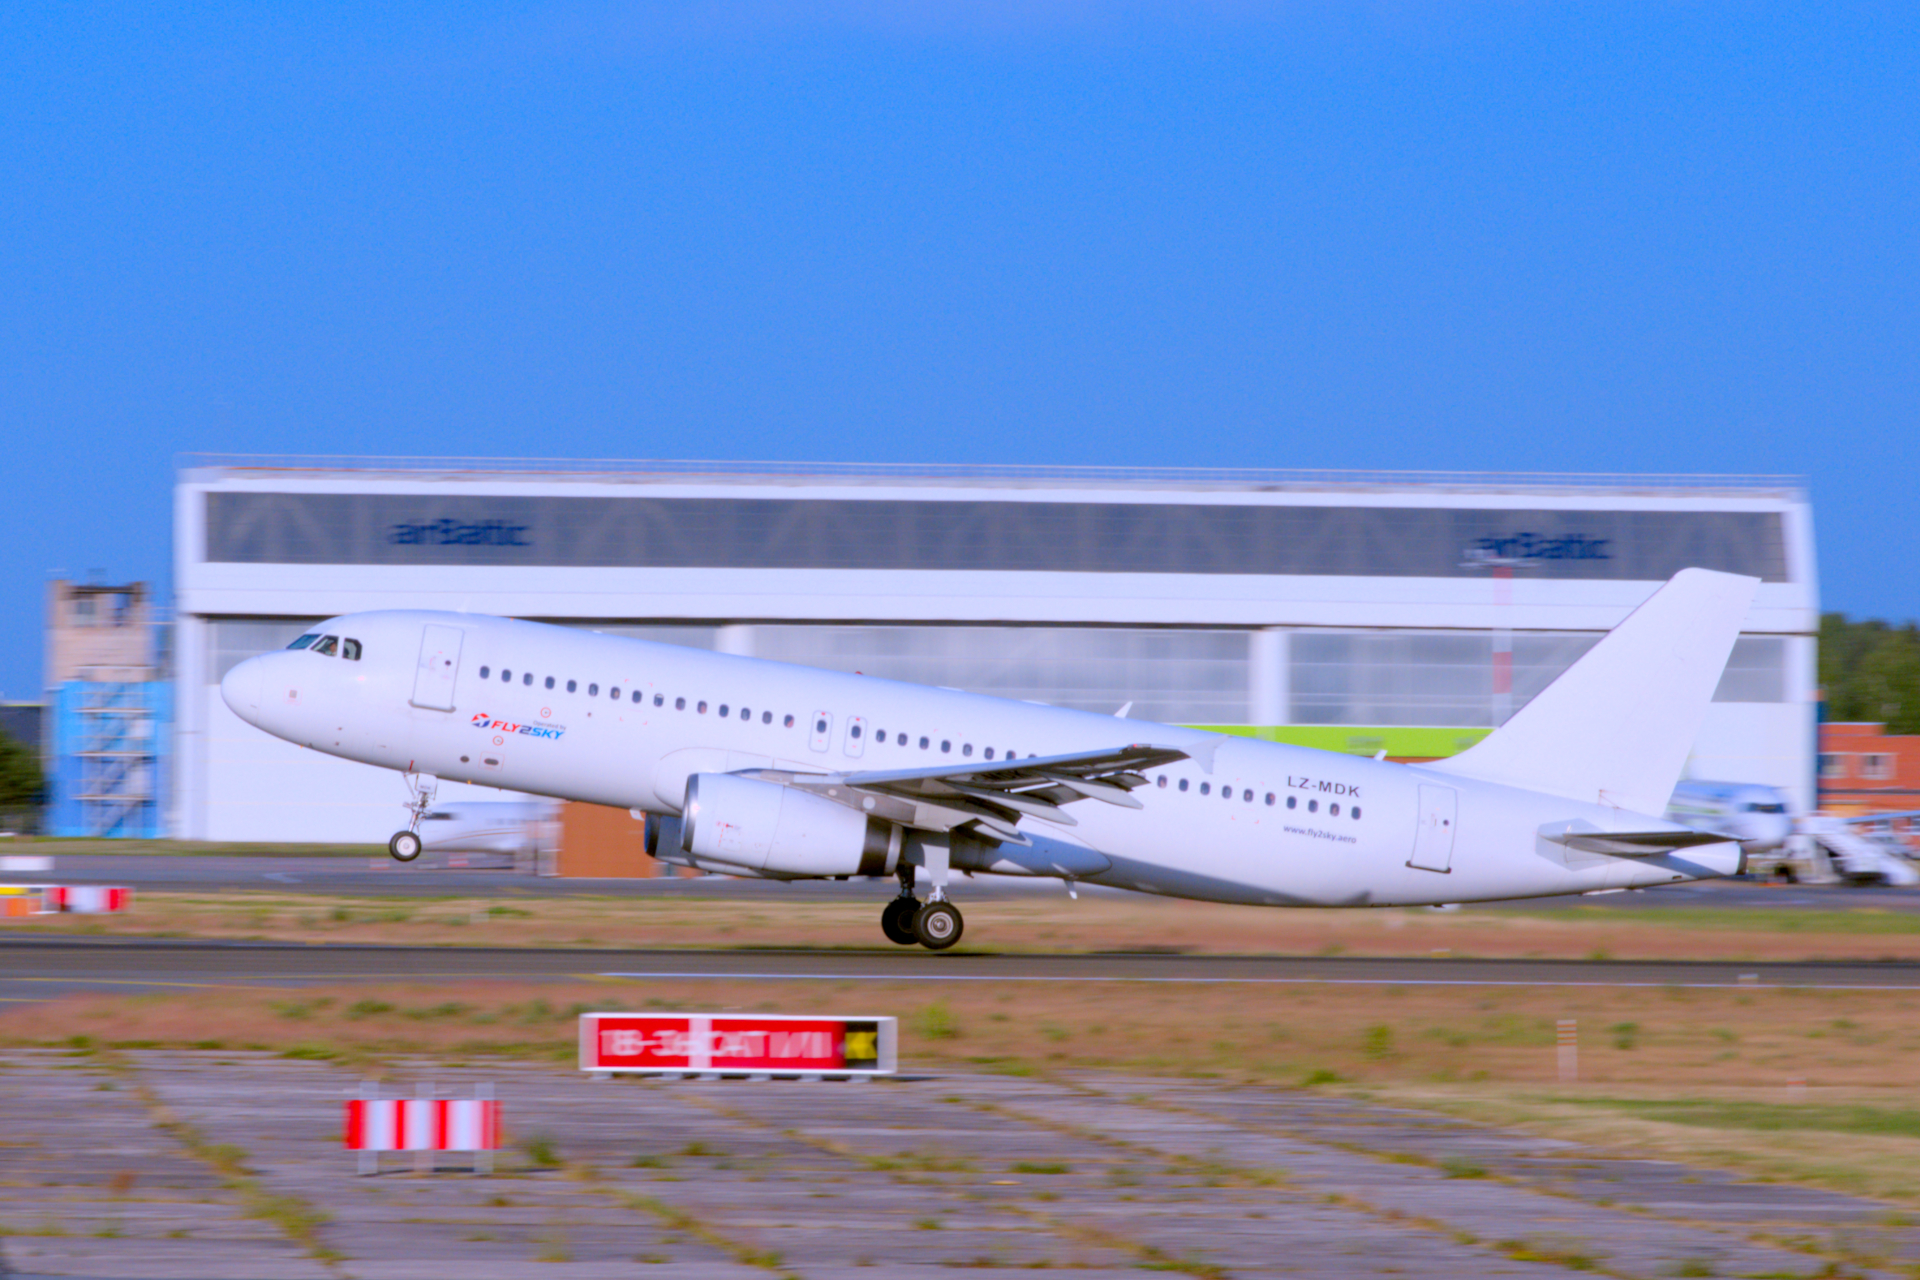 Fly2Sky Airbus A320-232 LZ-MDK